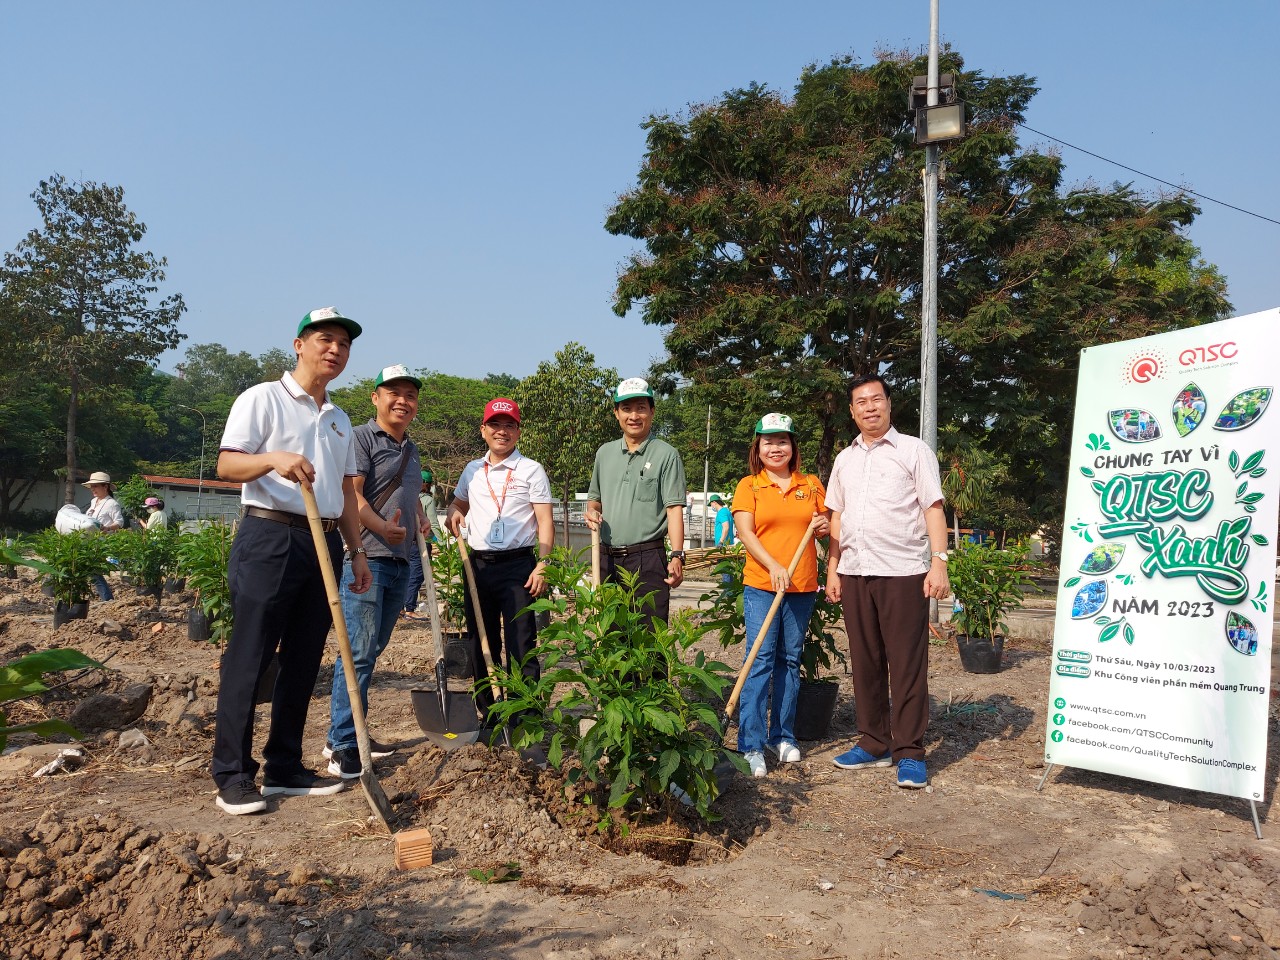 The leaders of QTSC, HANE and units participated in planting trees